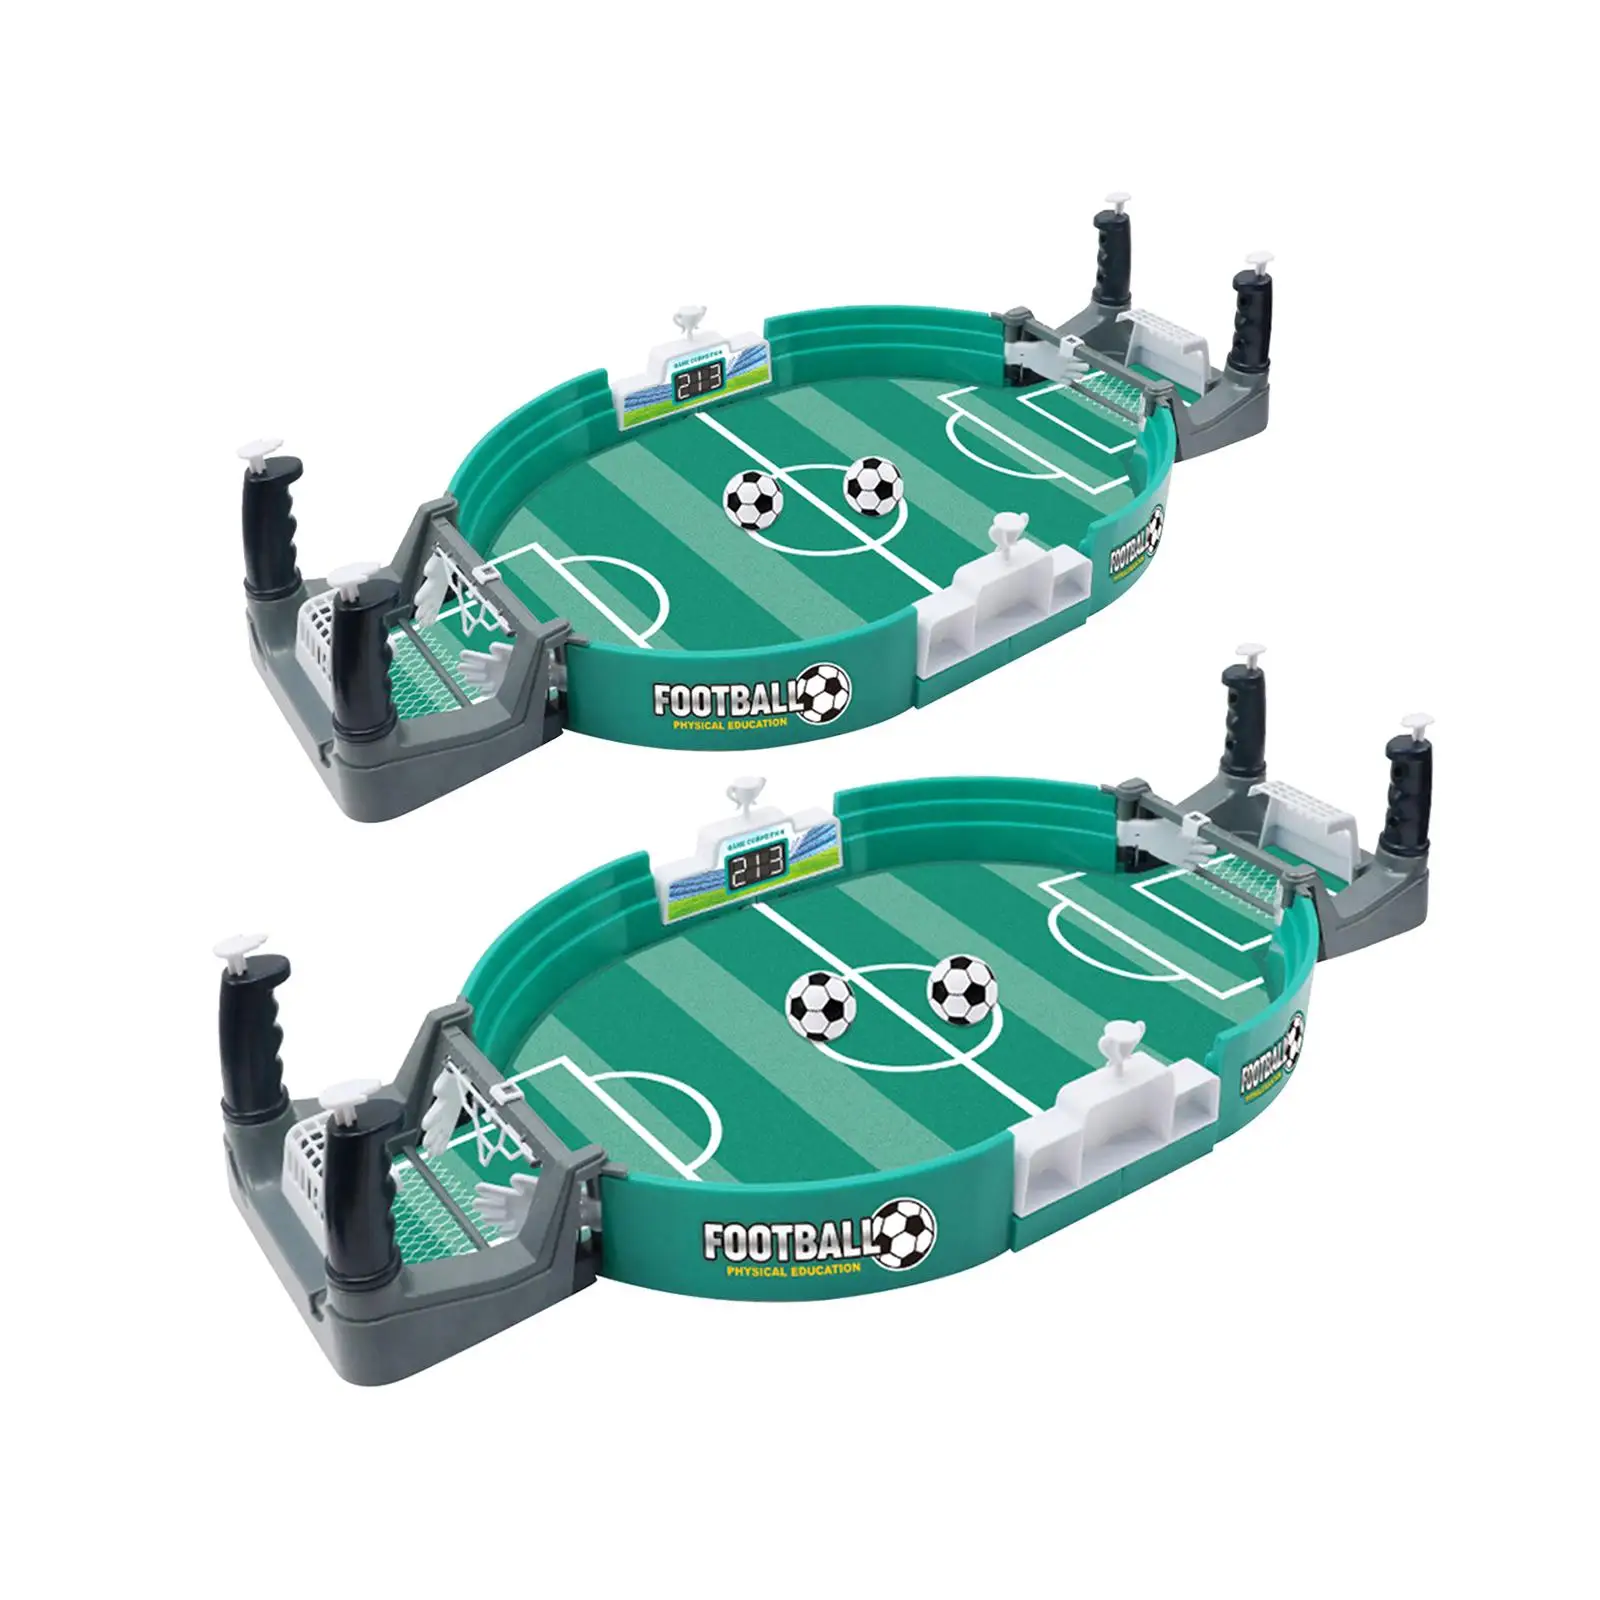 Soccer Sports Game Interactive Toy Mini Tabletop Football Tabletop Play Ball Soccer Toy for Family Two Player